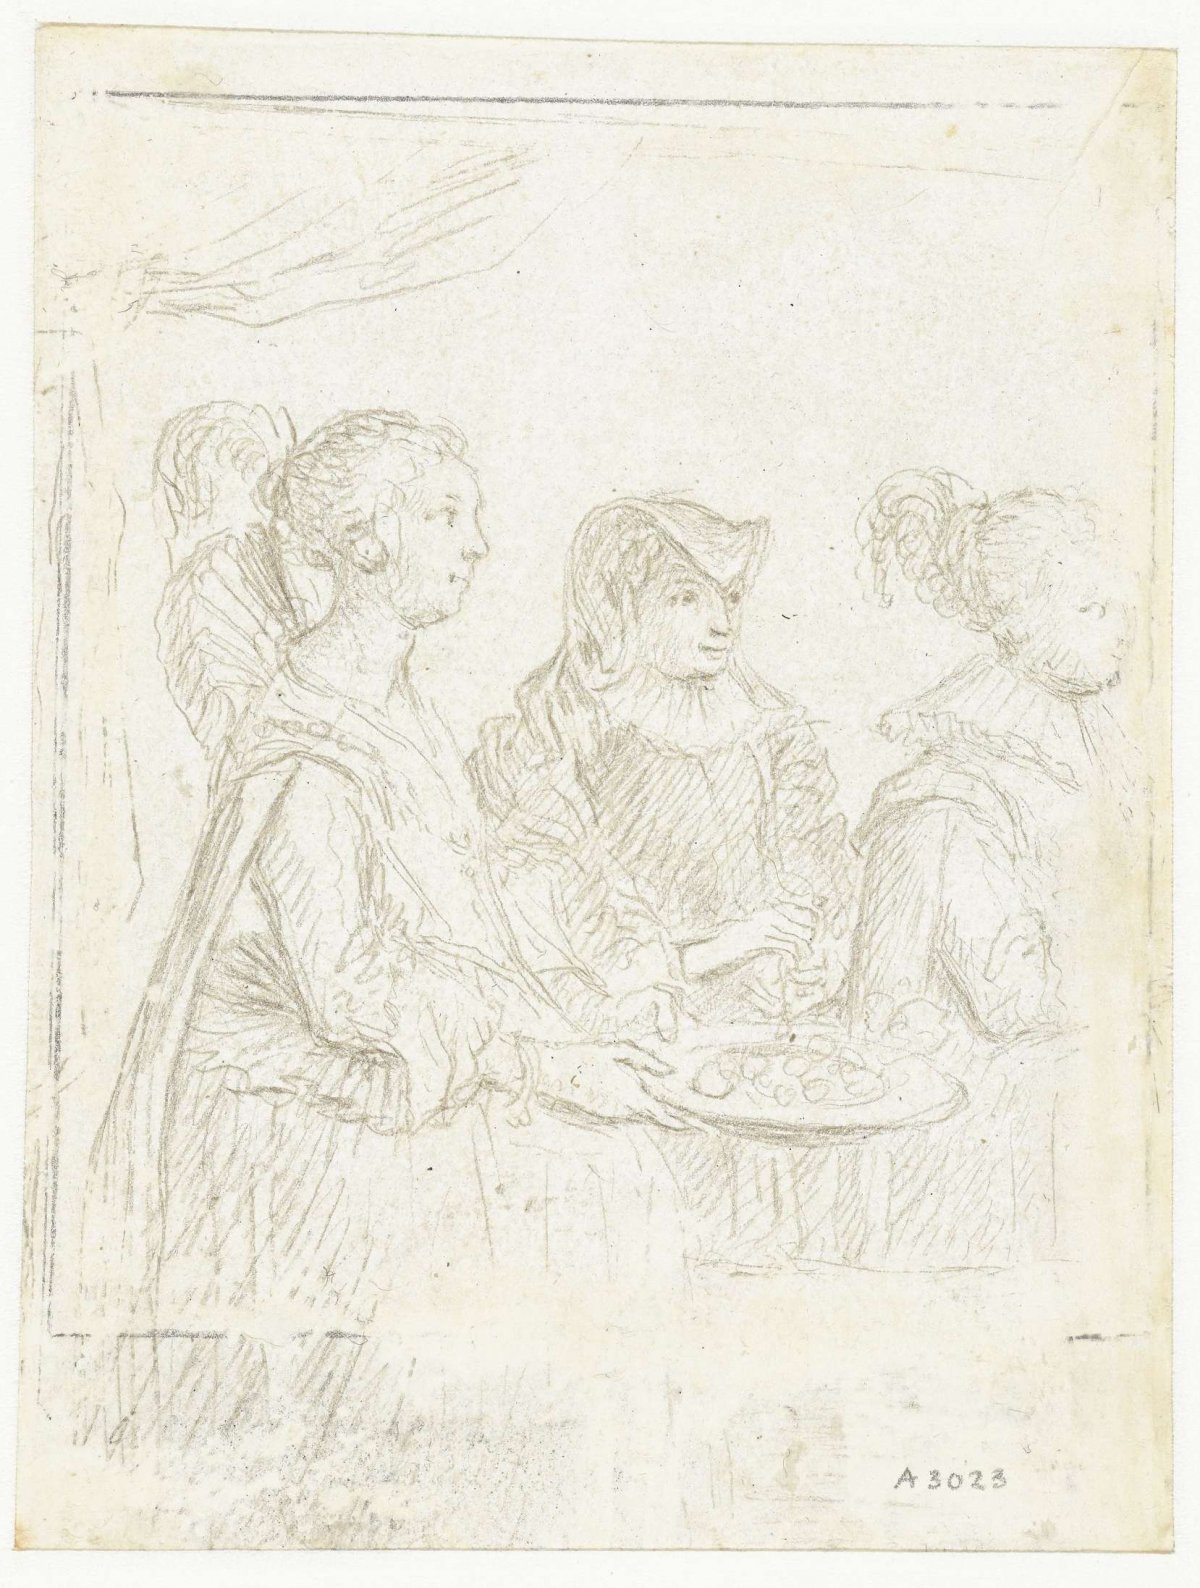 Two court ladies and a distinguished woman in mourning dress (Amalia of Solms?), Jacques de Gheyn (II), 1625